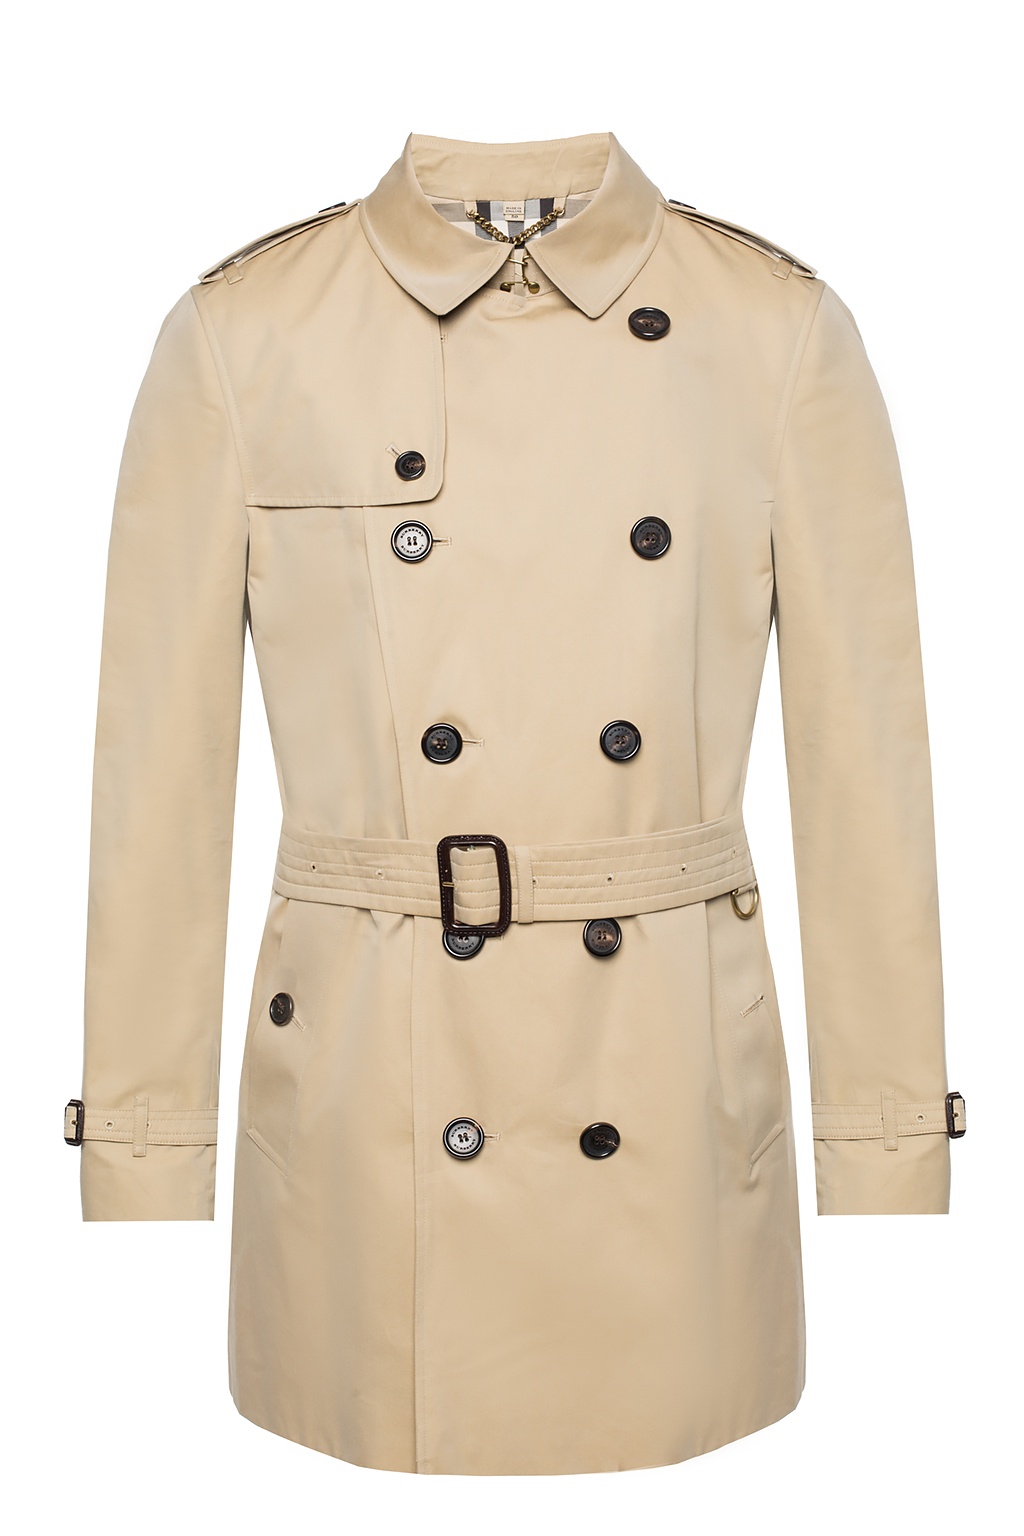 Burberry Double-Breasted 'Kensington' Trench Coat | Men's Clothing 